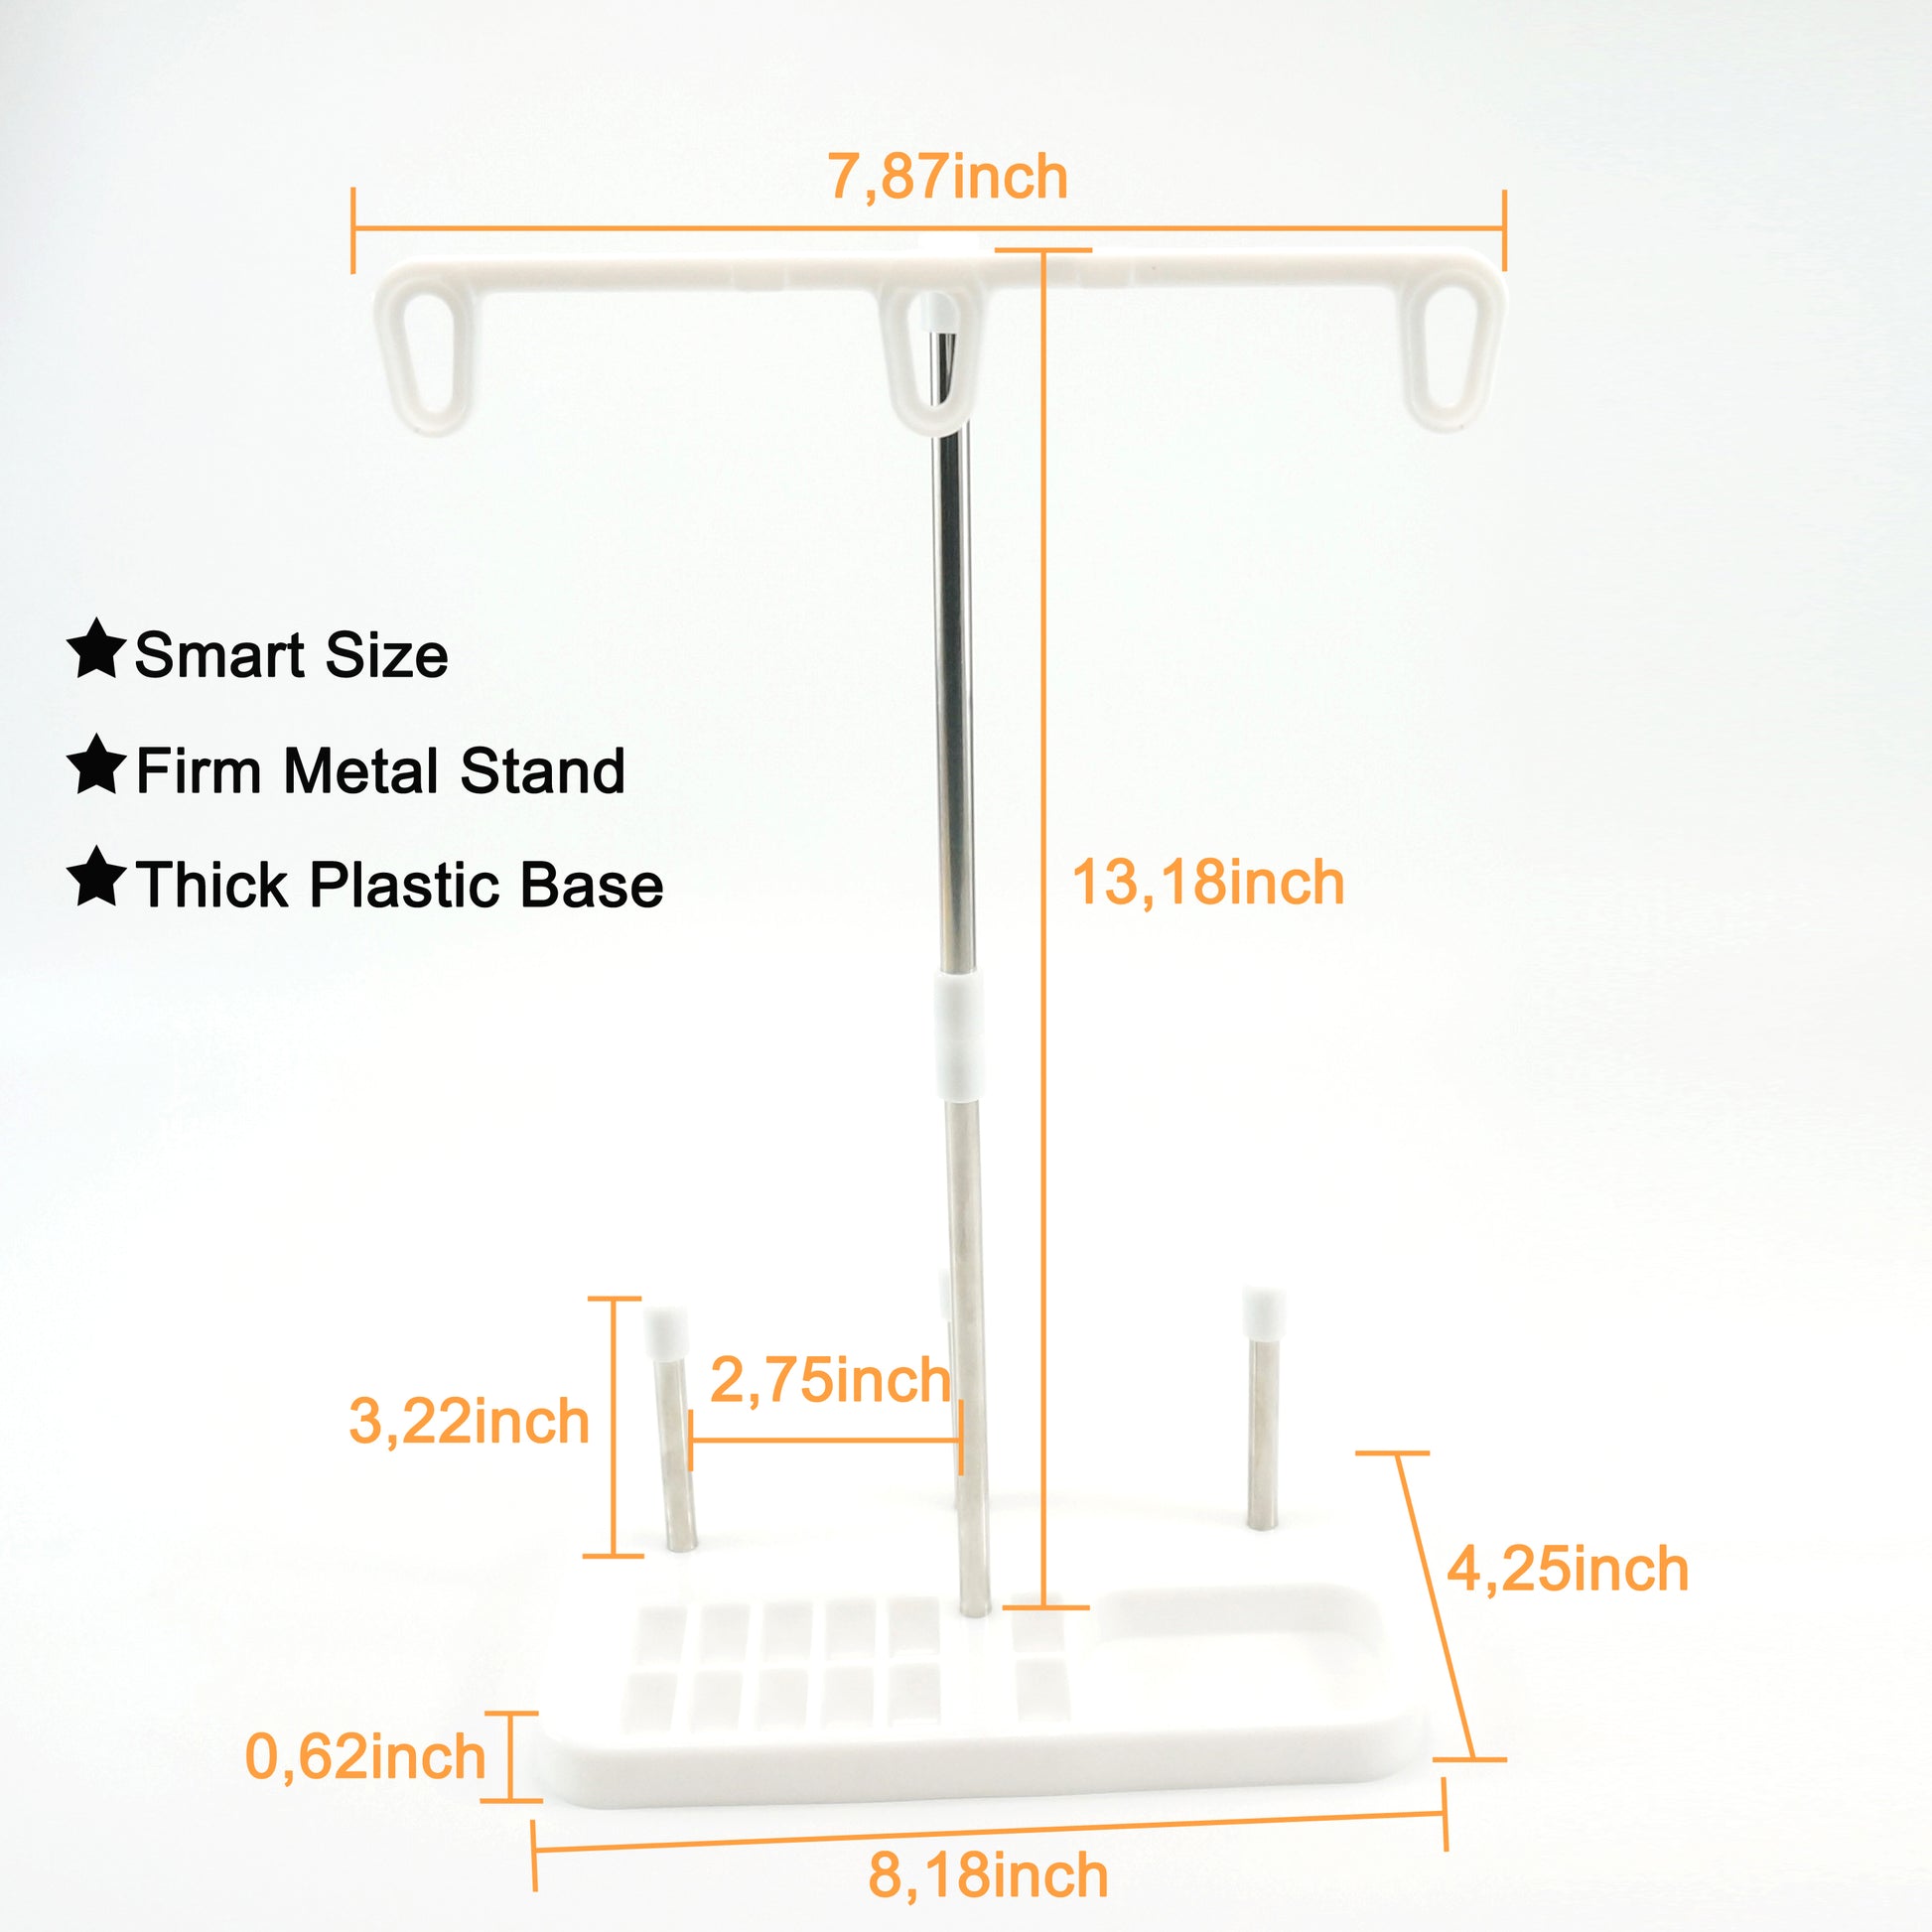 sleeri Spool Thread Holder Stand - 3 Spools Home Sewing Machine Accessories  Embroidery Thread Spool Cone Holder Stand Lightweight 